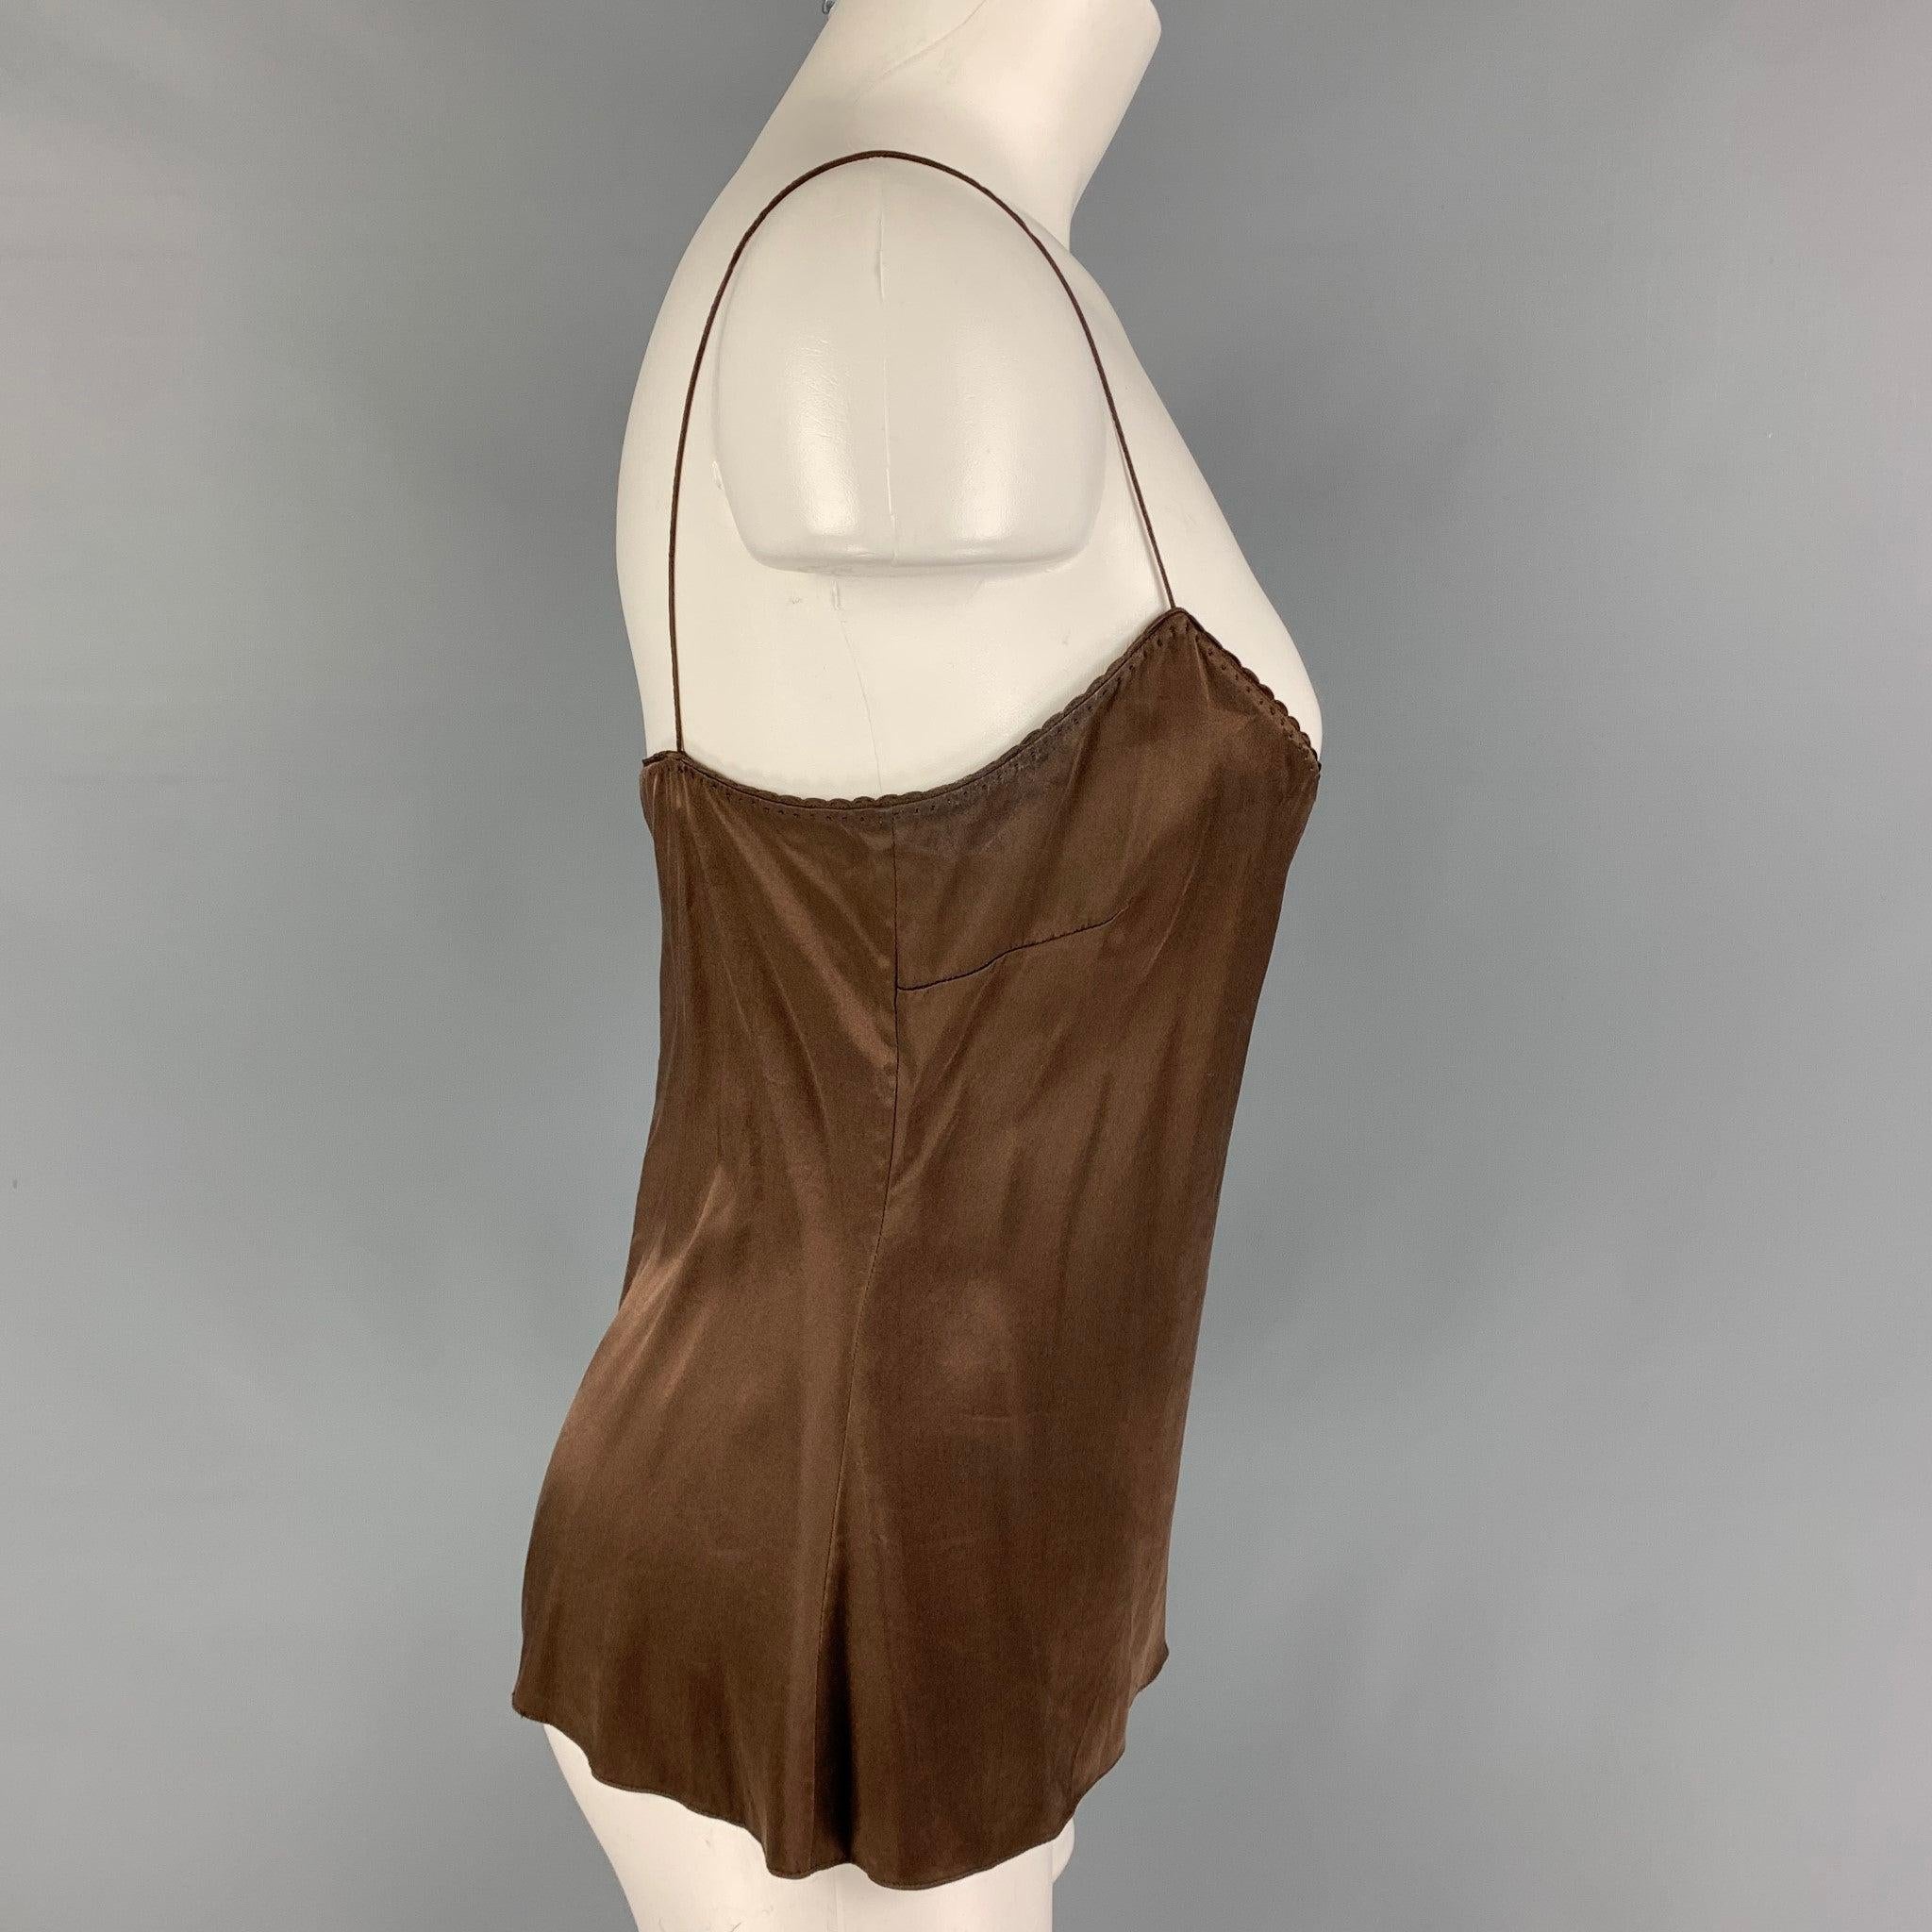 ELIE TAHARI blouse come in brown silk and elastane featuring a camisole style and spaghetti straps. Good Pre-Owned Condition. Light wear and discoloration at underarm. As-is.  

Marked:   S 

Measurements: 
  Bust: 32 inches Length: 16 inches  
  
 